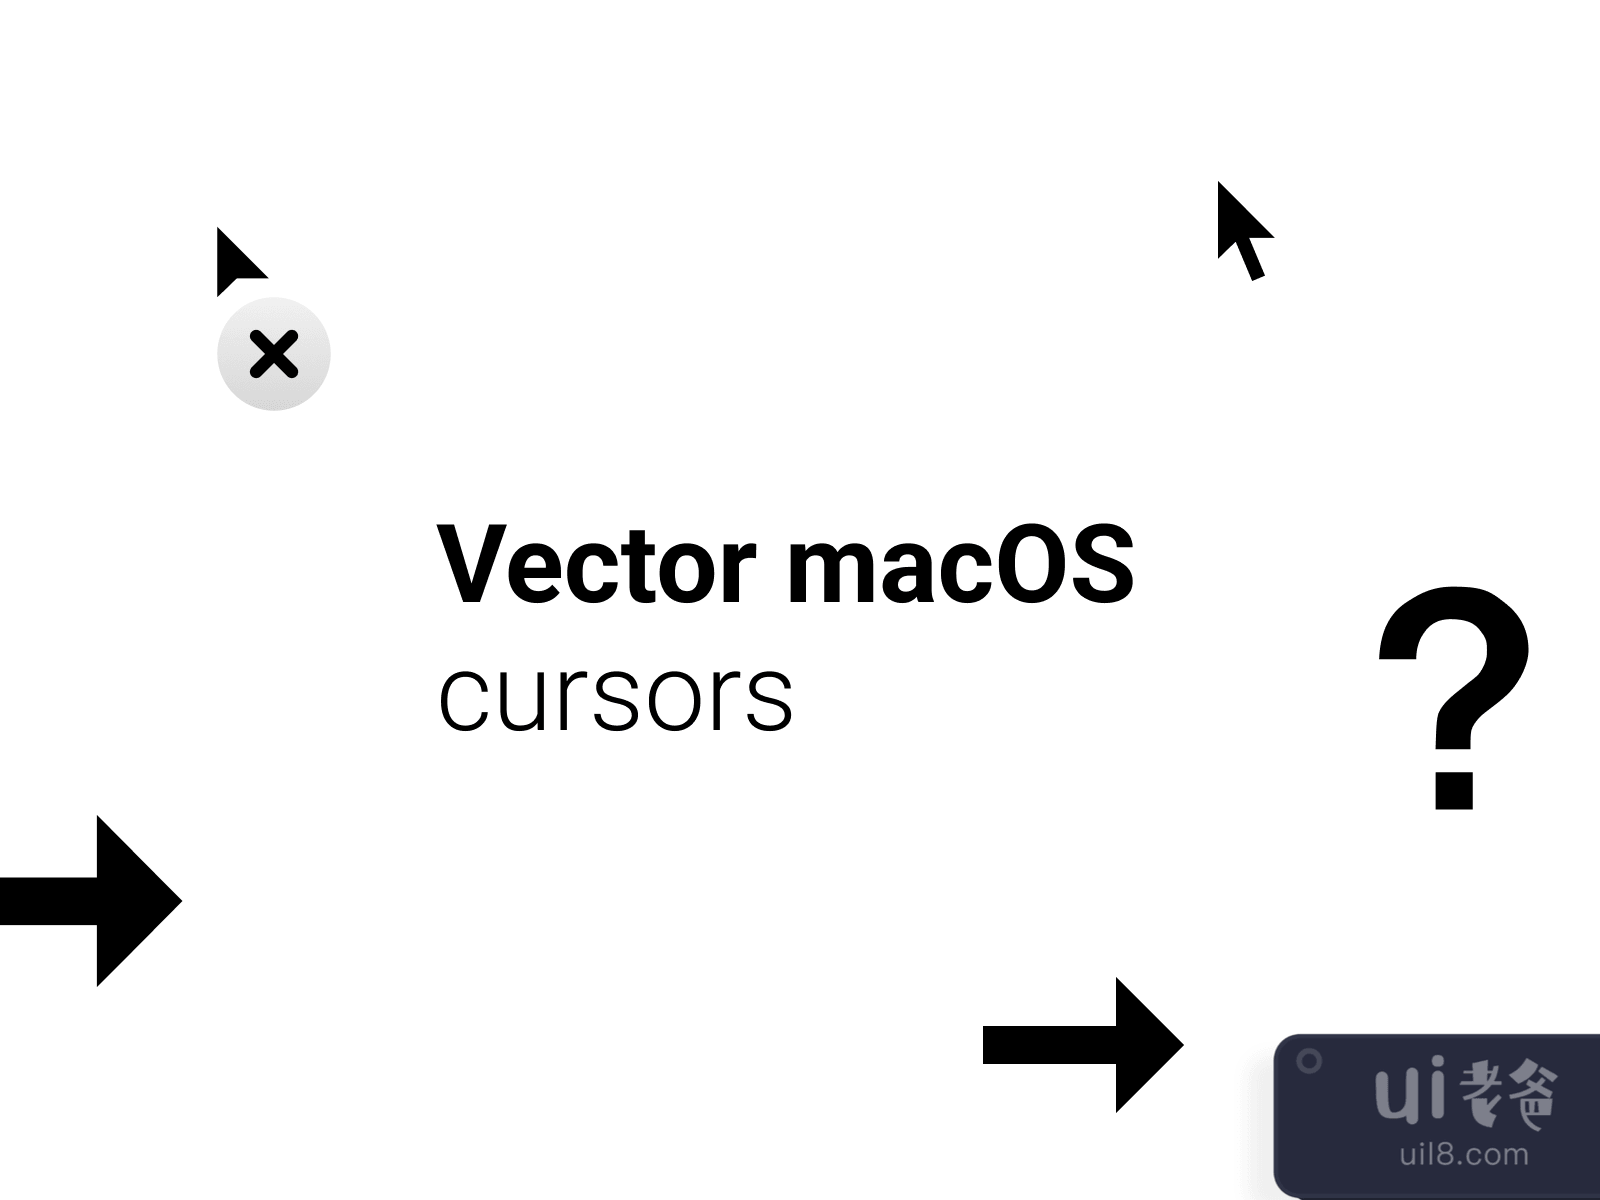 Vector macOS Cursors for Figma and Adobe XD No 4